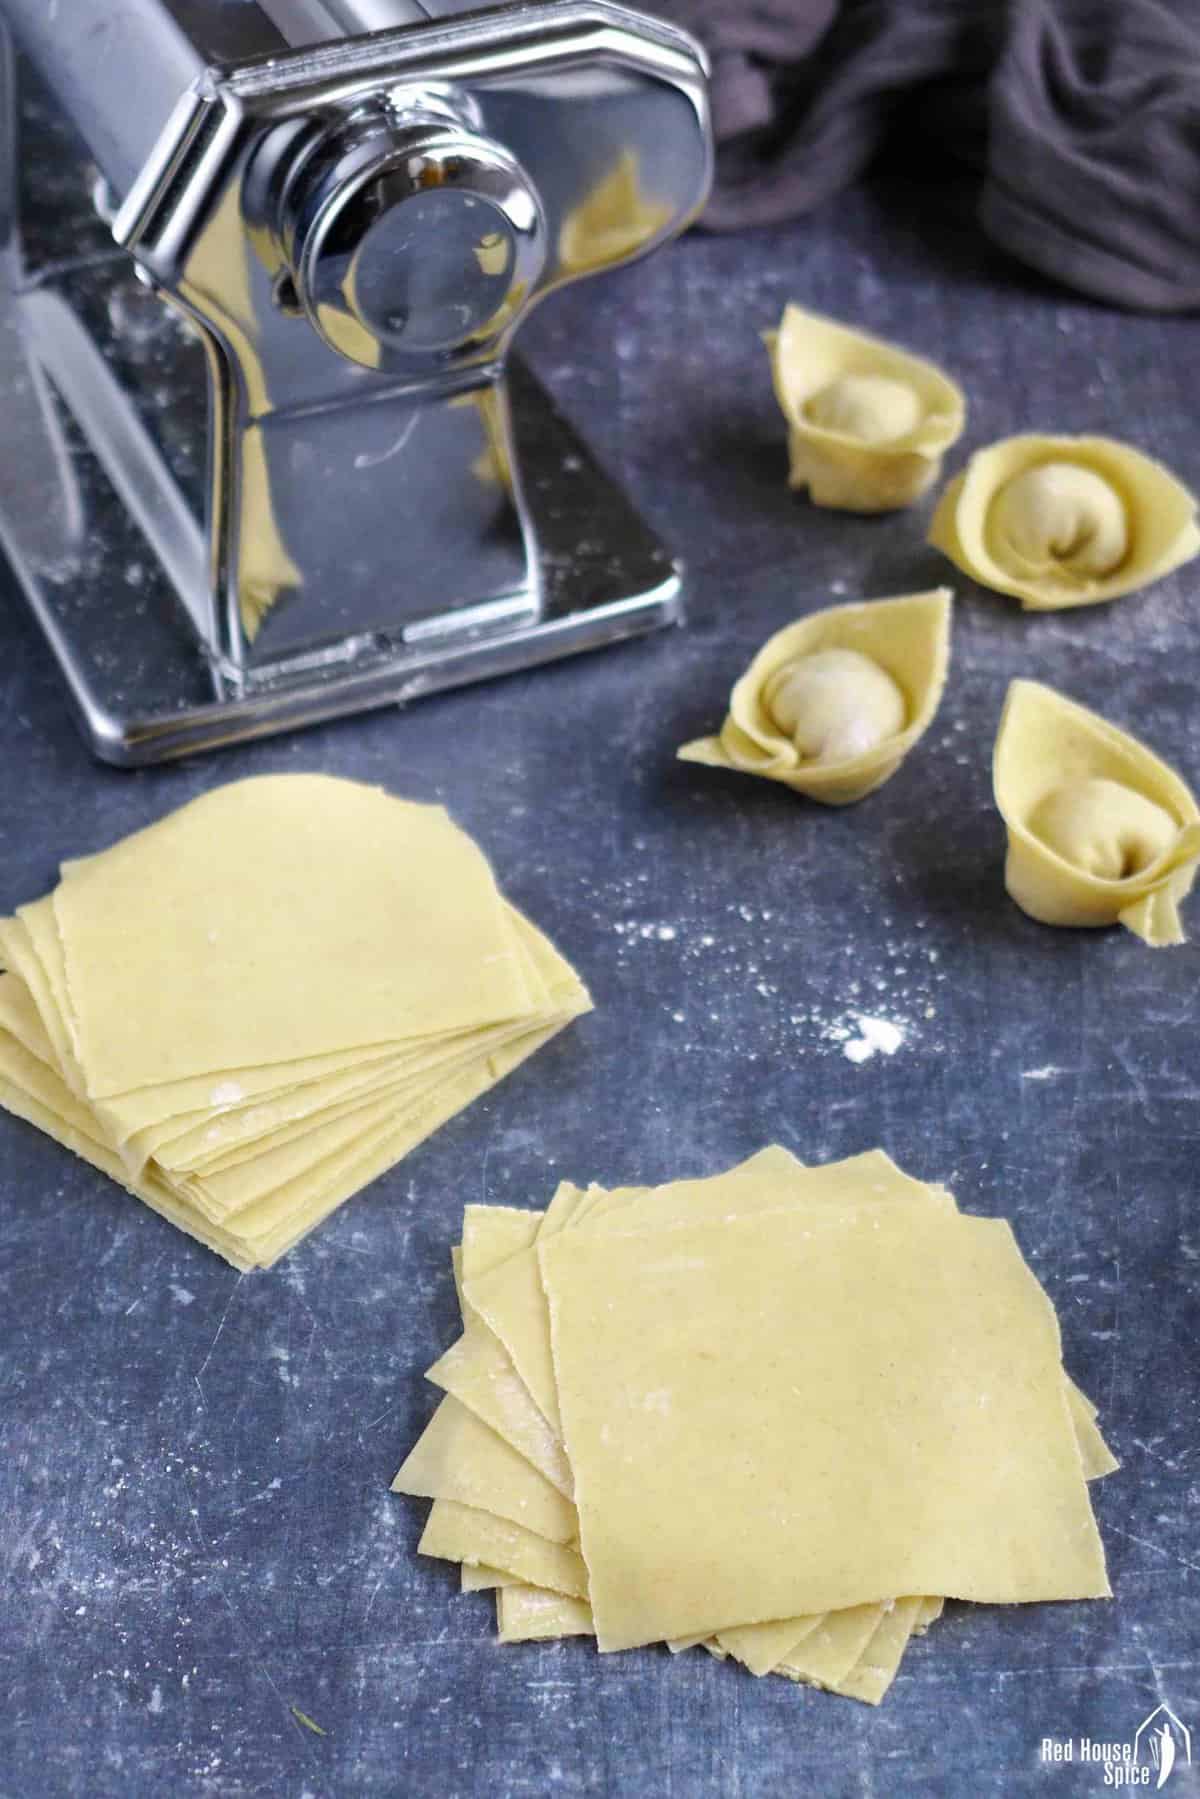 wonton wrappers with stuffed wontons and a pasta machine.